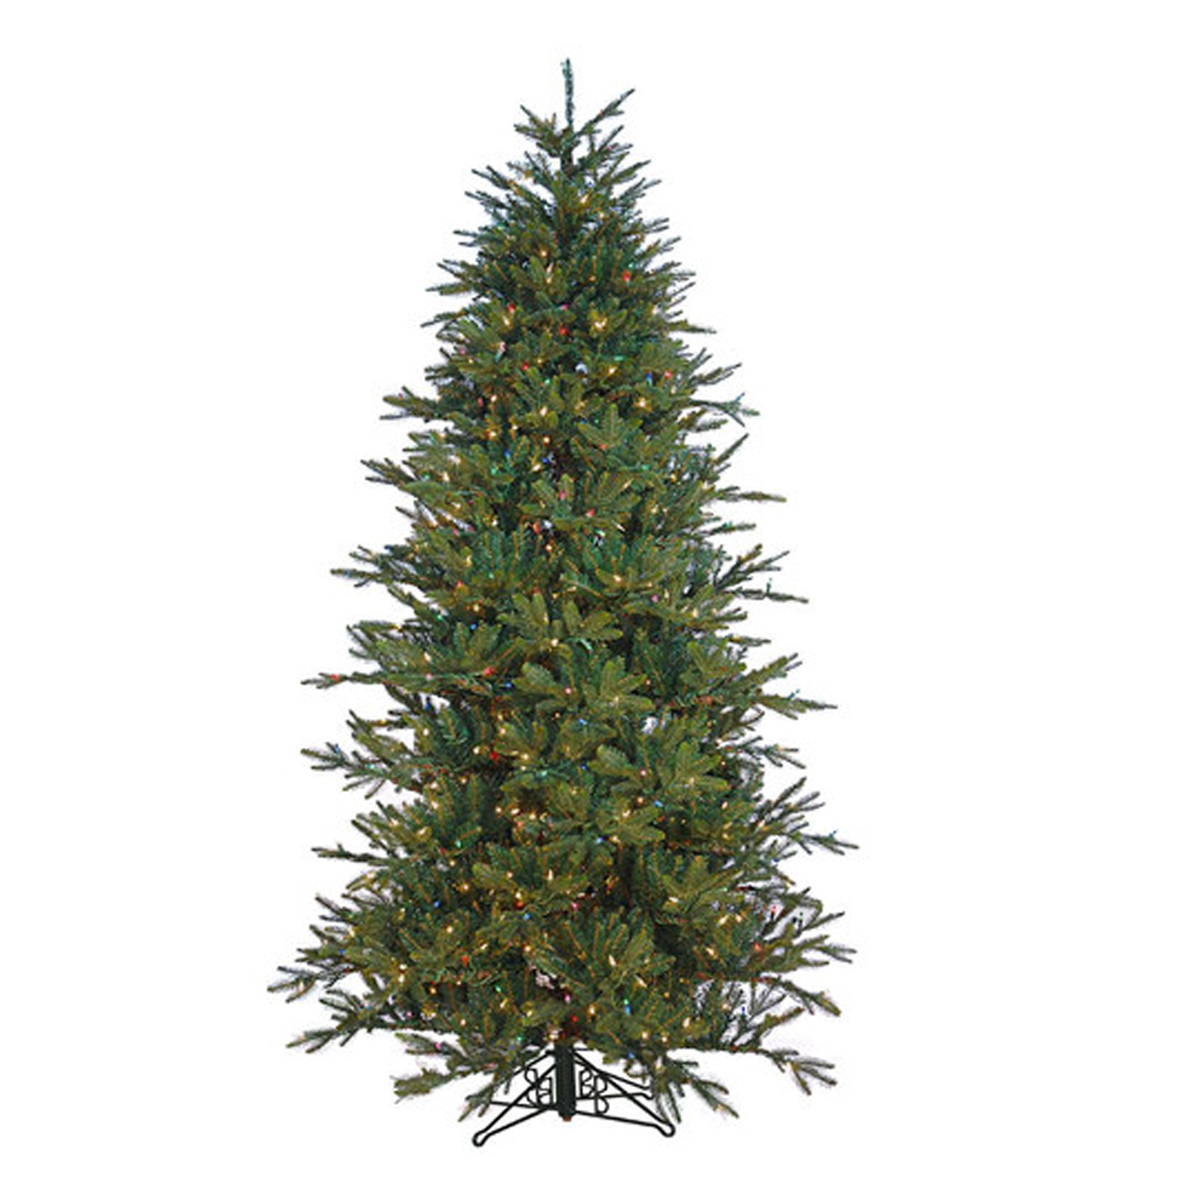 Alaskan Deluxe Christmas Tree - Clear Incandescent Light String - One-Plug Pole Power Supply - 7.5ft Tall